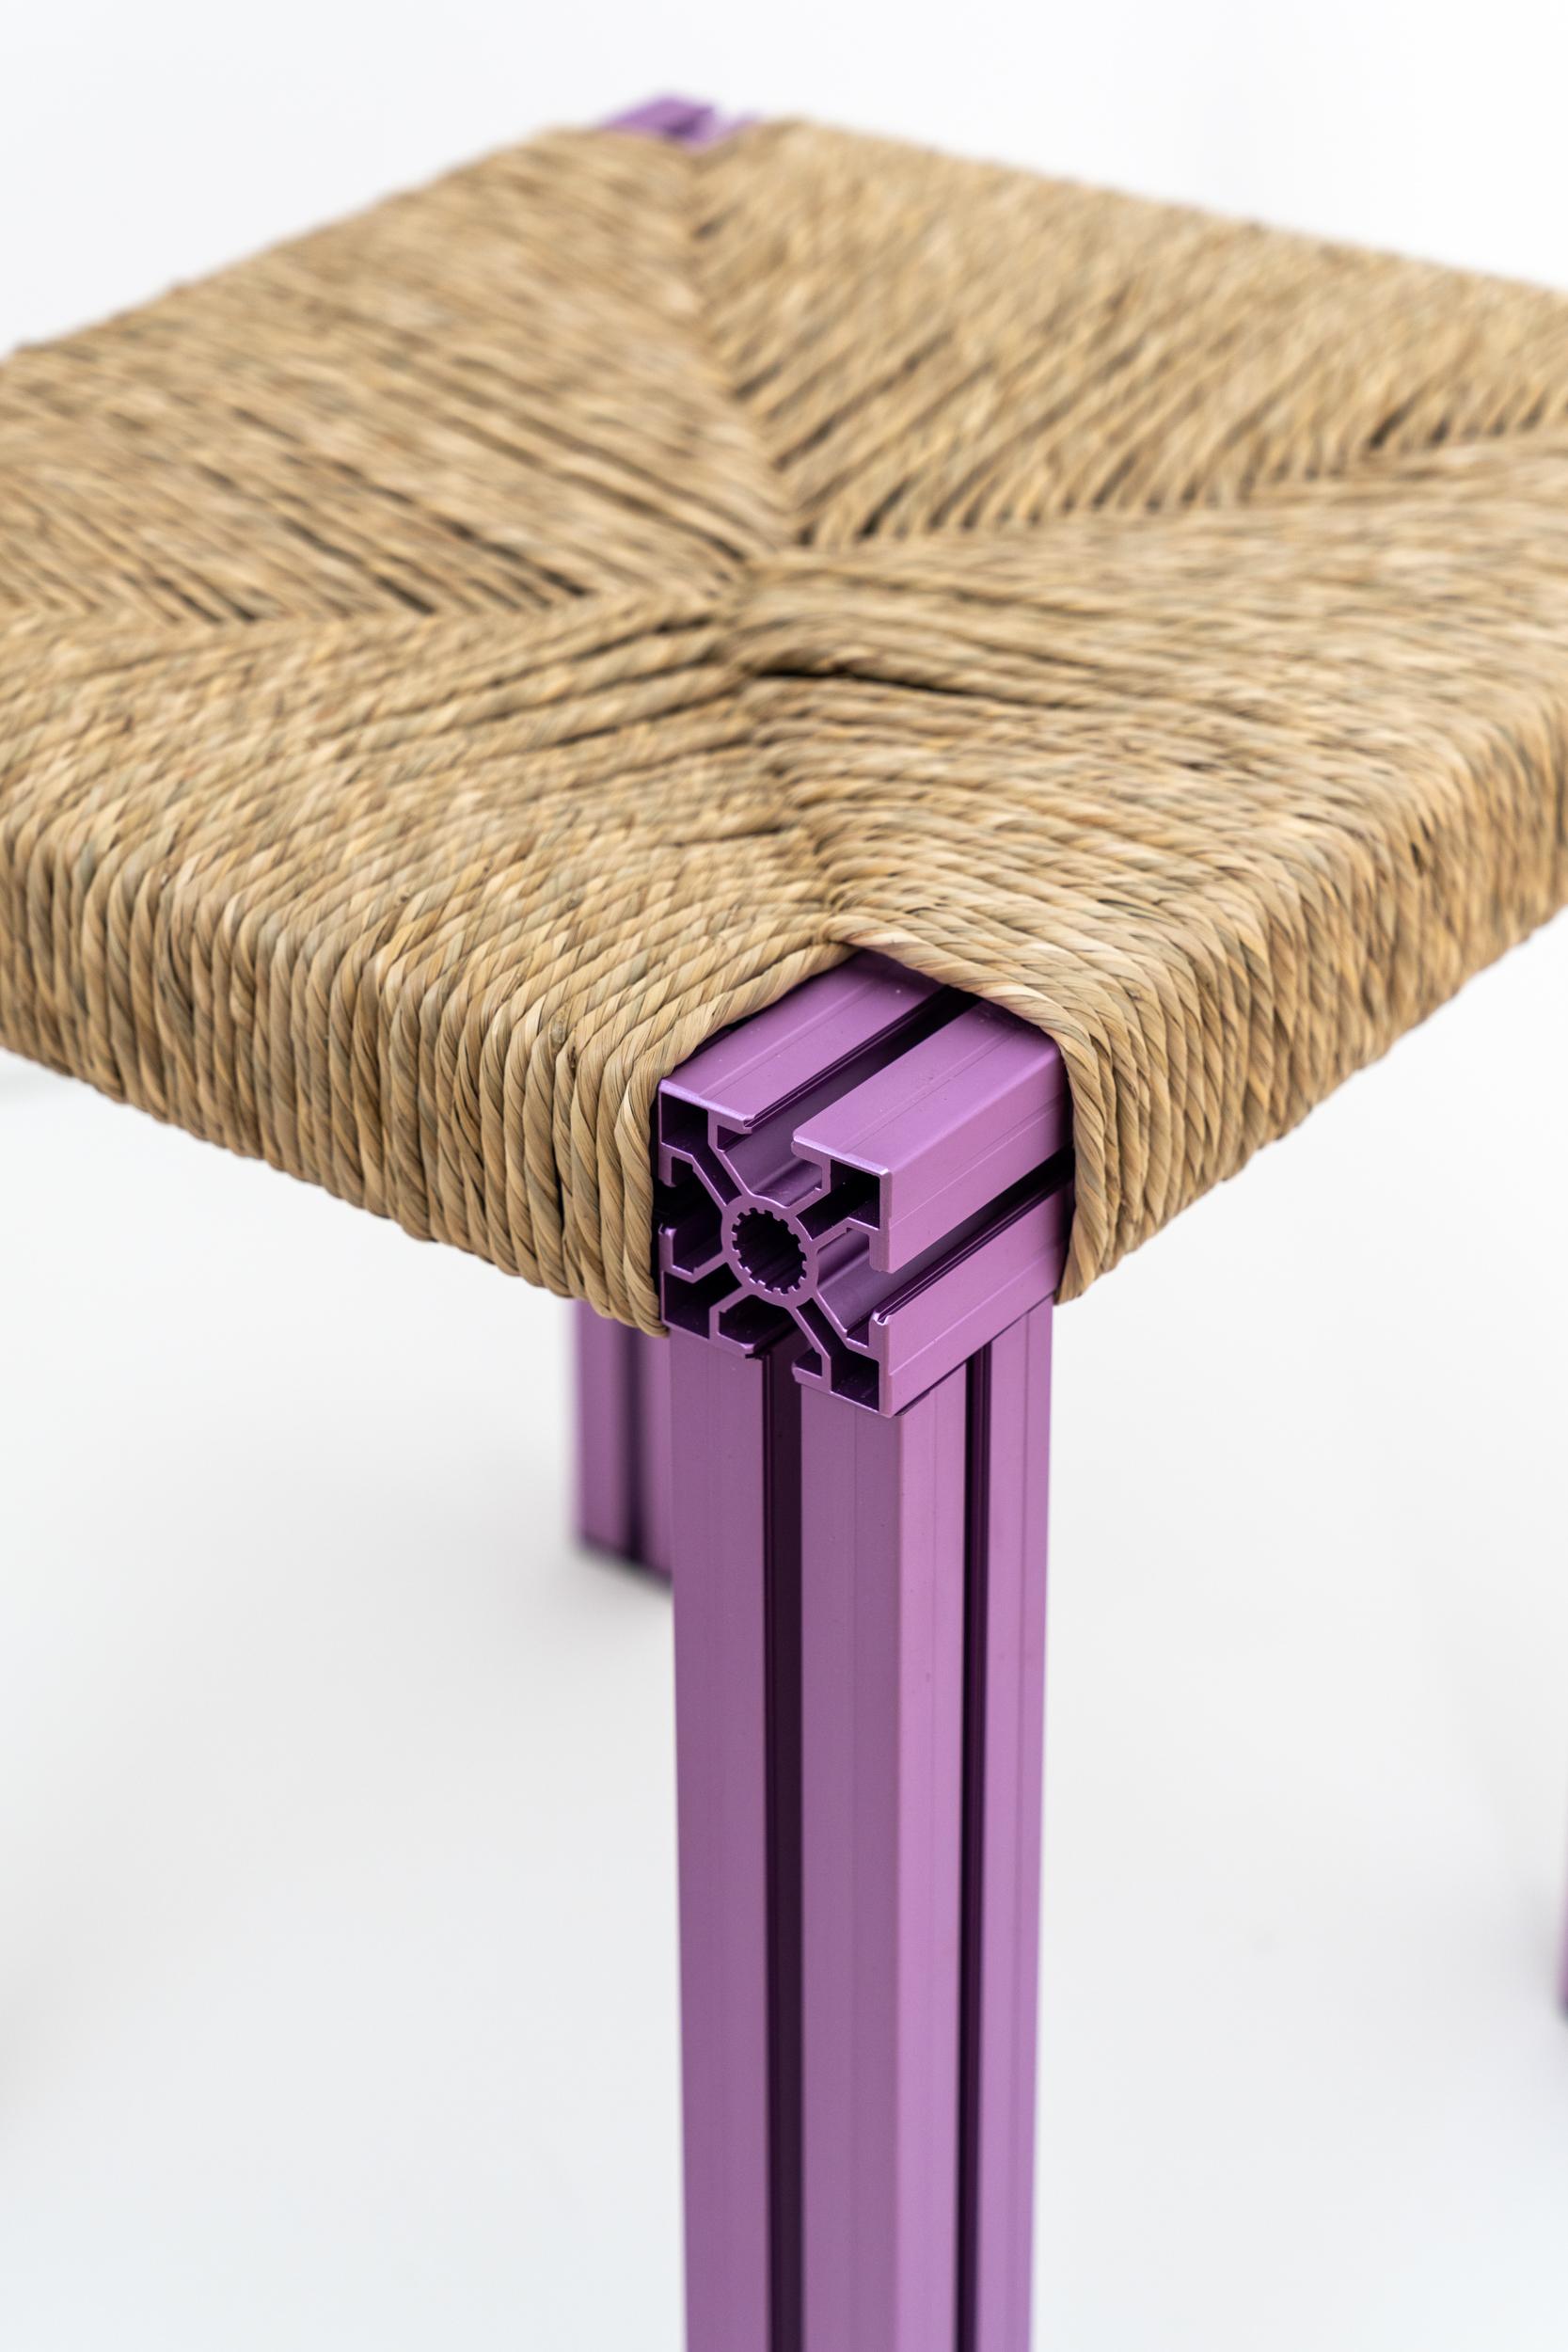 Post-Modern Anodized Purple and Rush Weave Wicker Stool by Tino Seubert For Sale